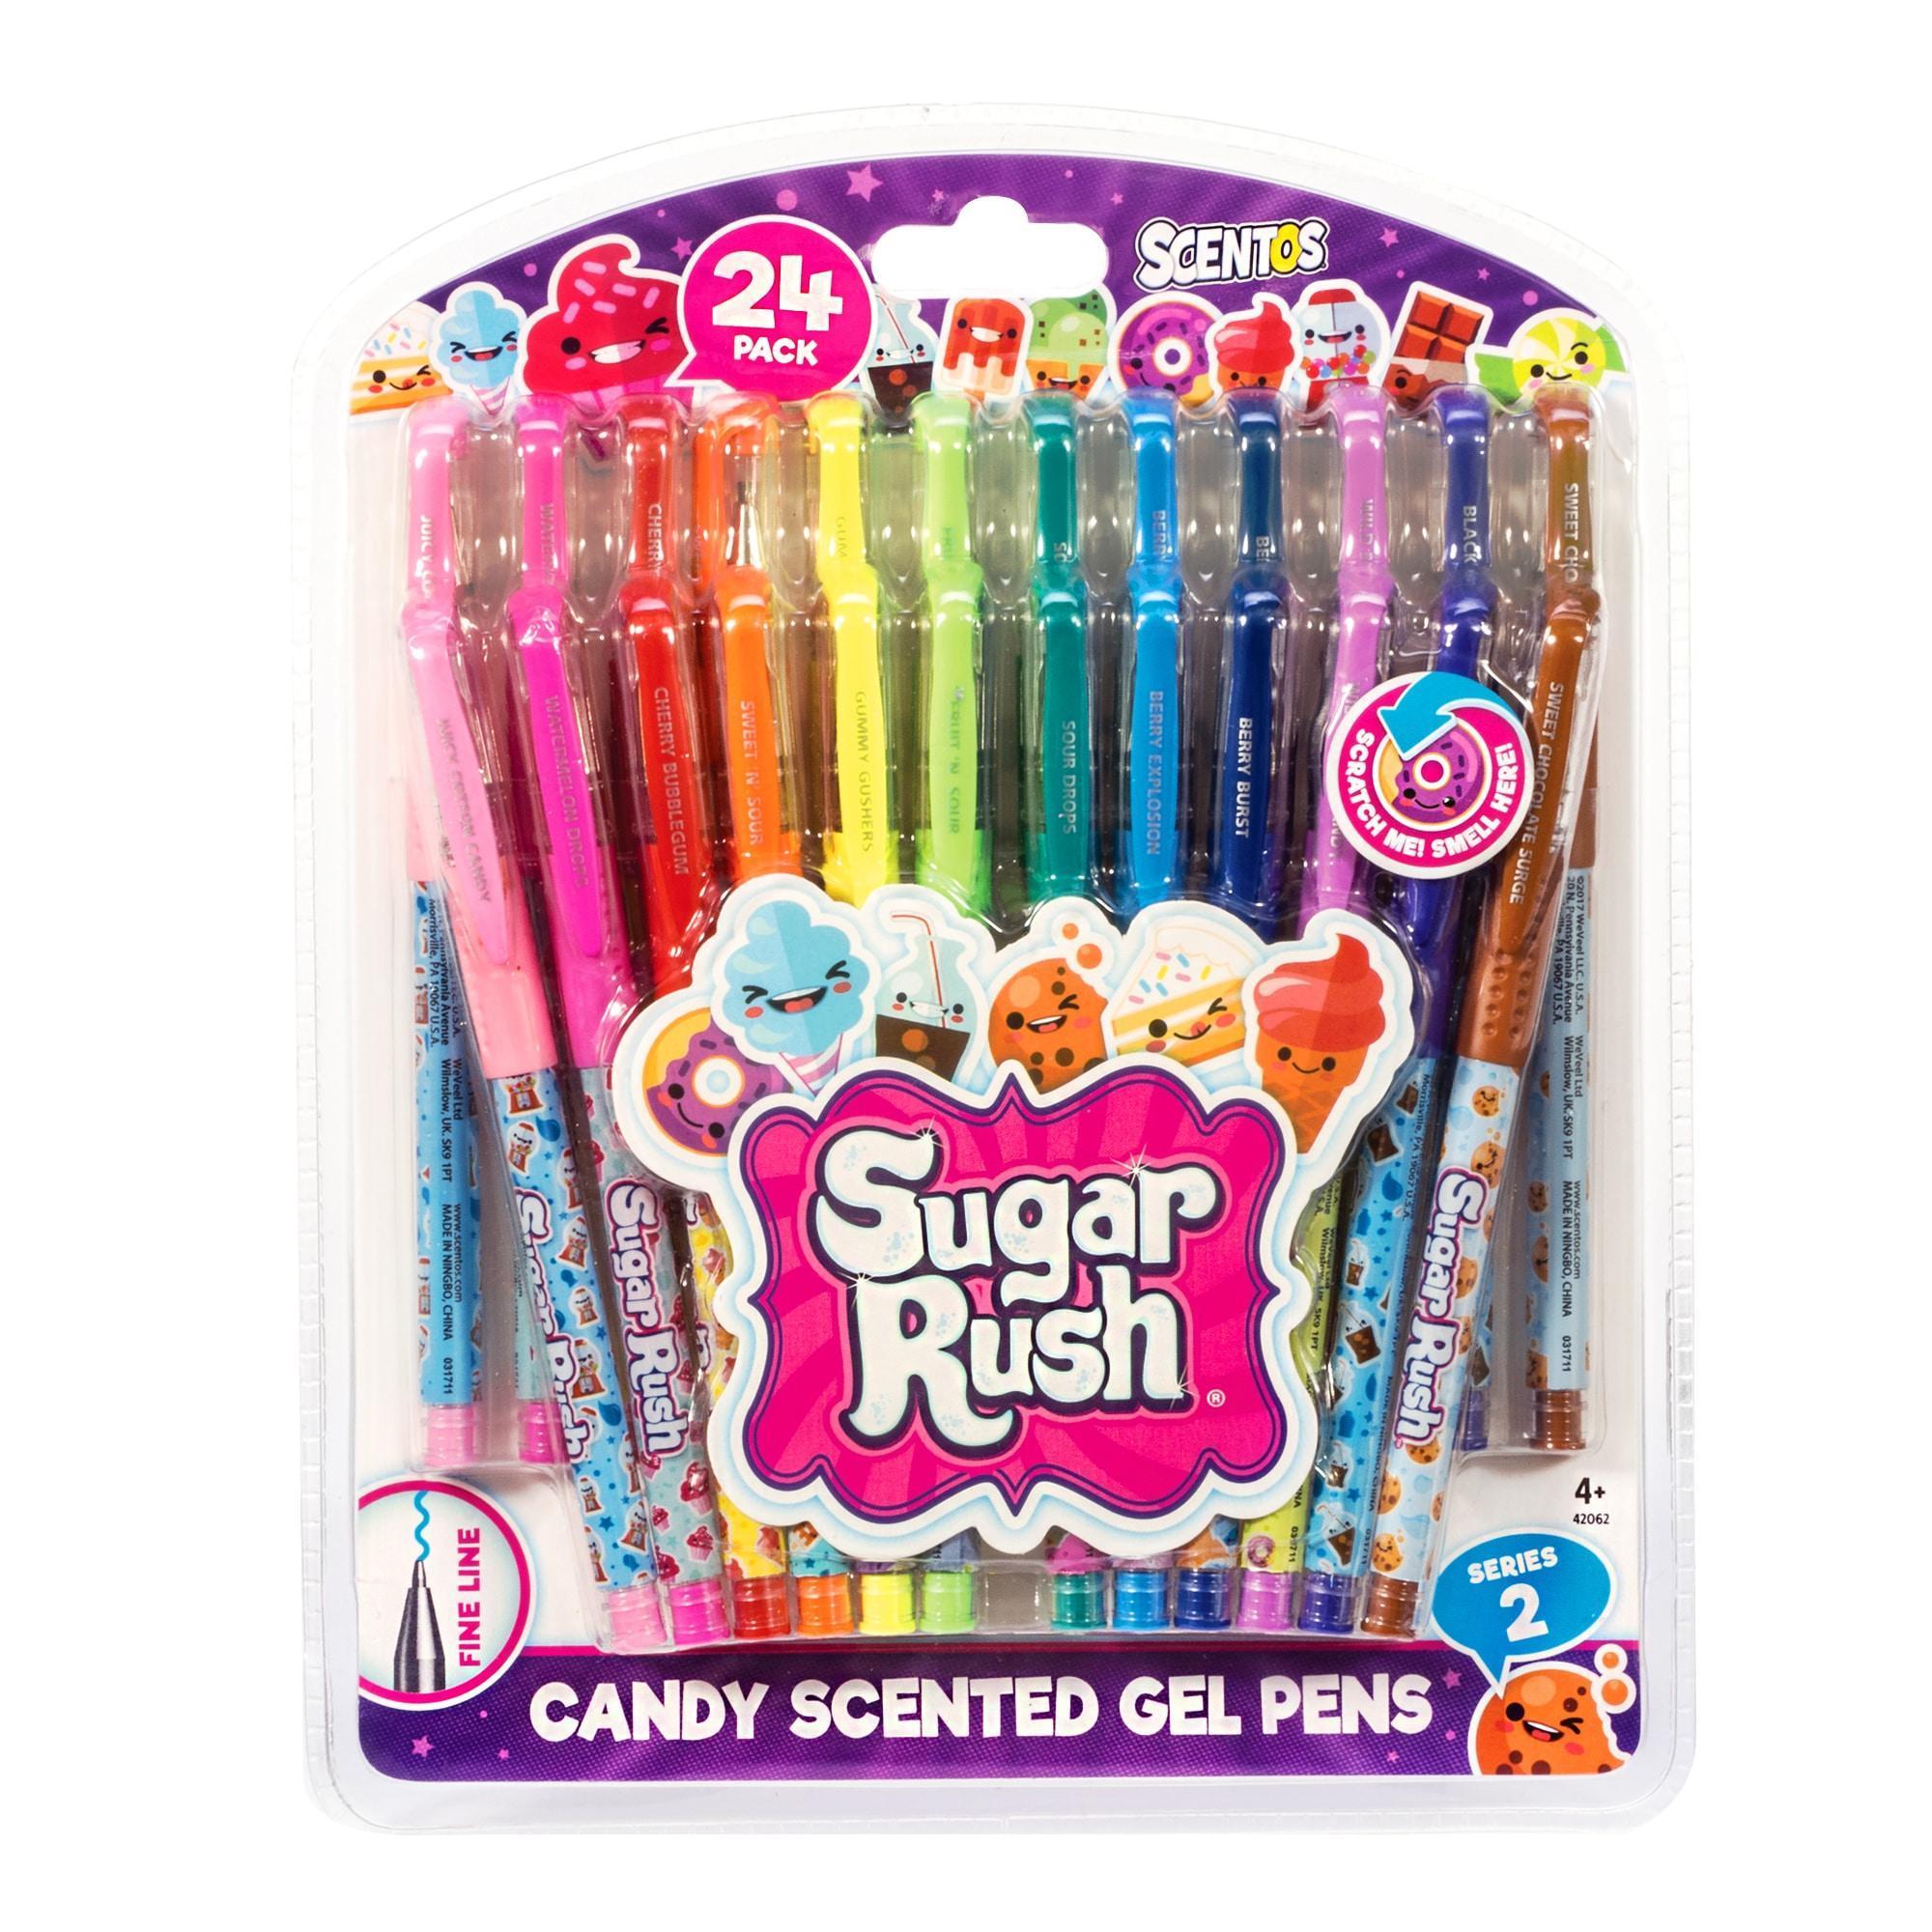 SCENTOS - 24 Pack Sugar Rush Candy Scented Gel Pens - Sealed $14.95 -  PicClick